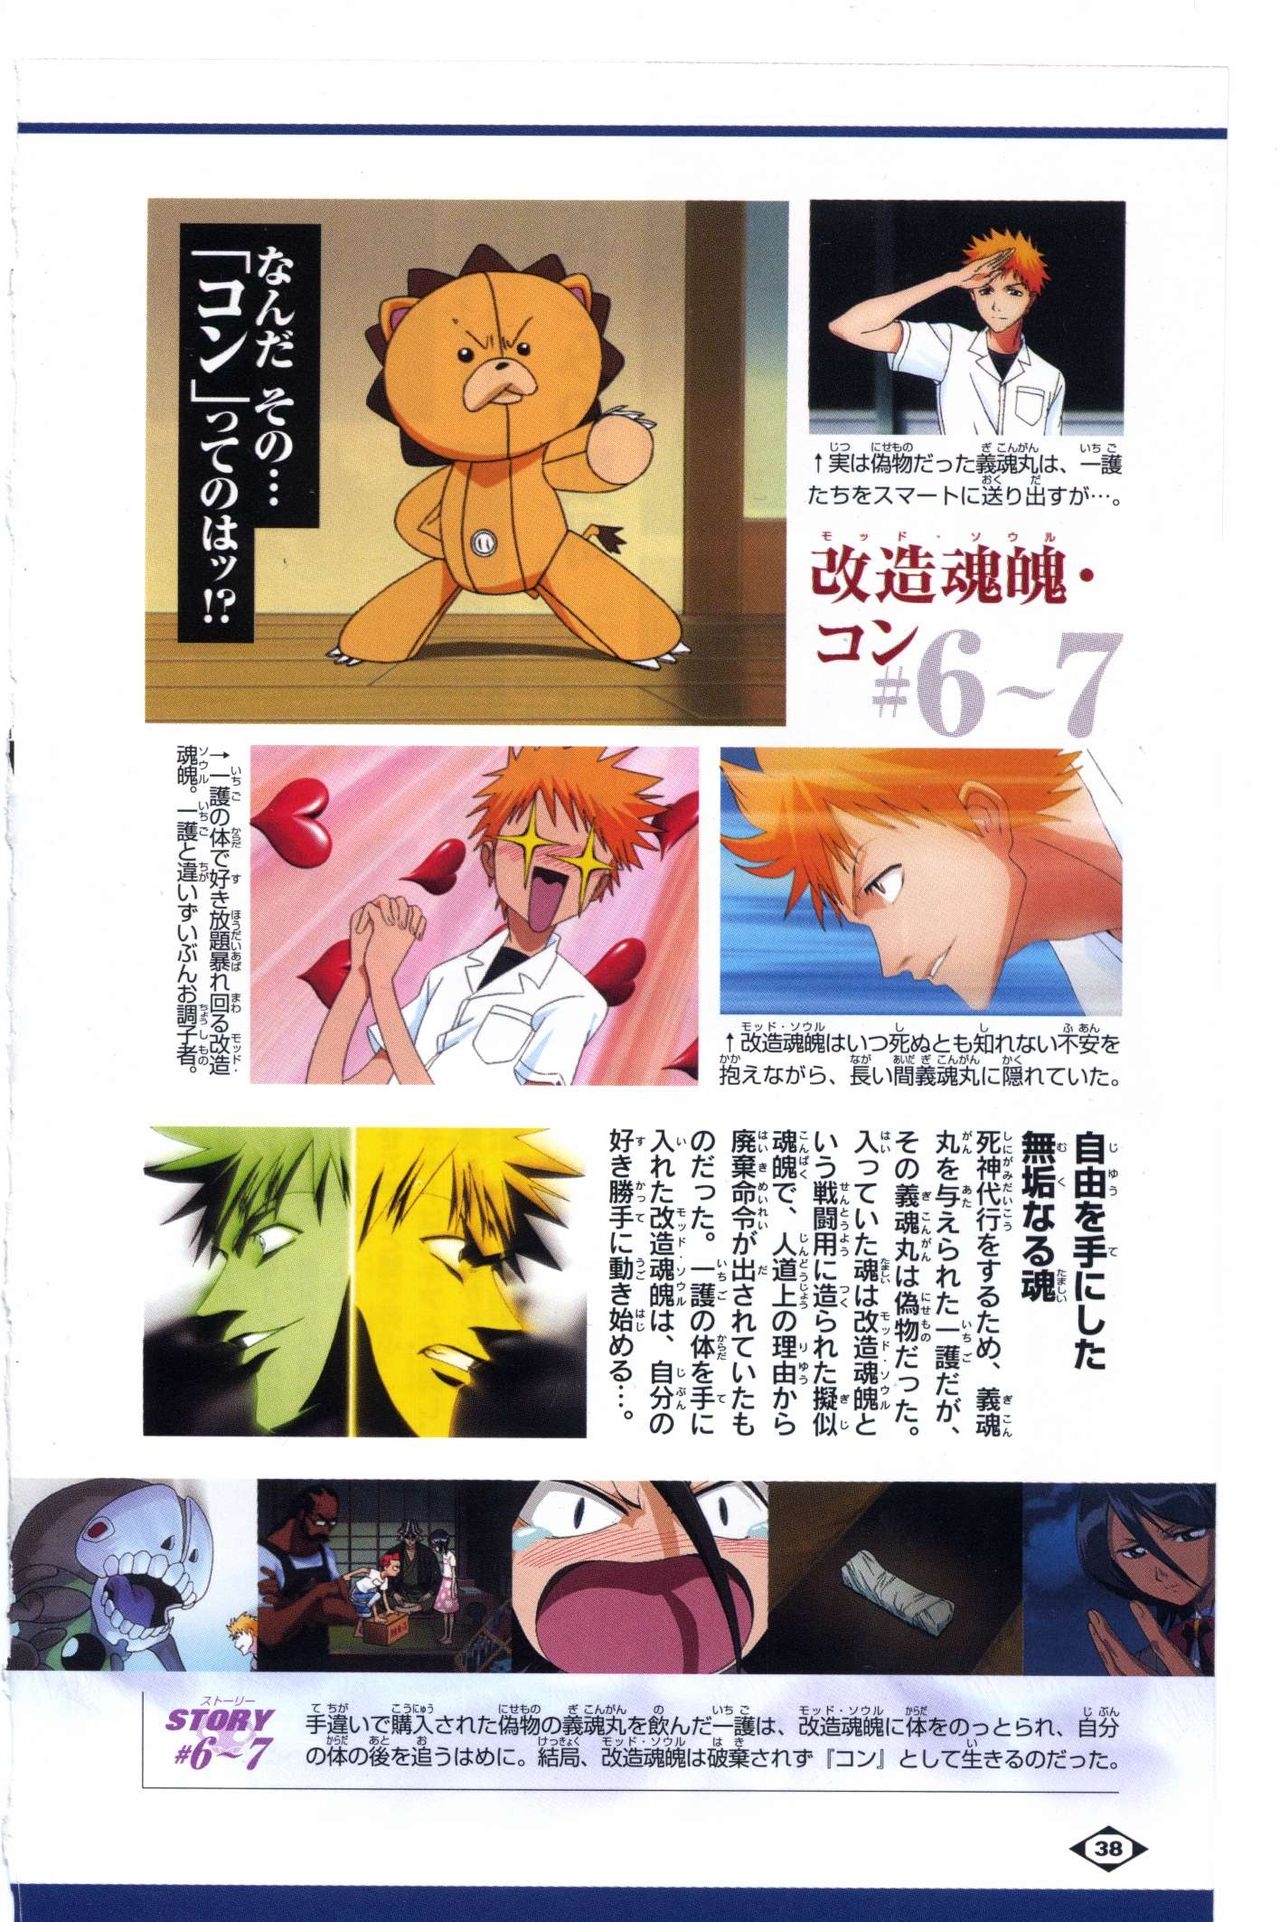 Bleach: Official Animation Book VIBEs 38